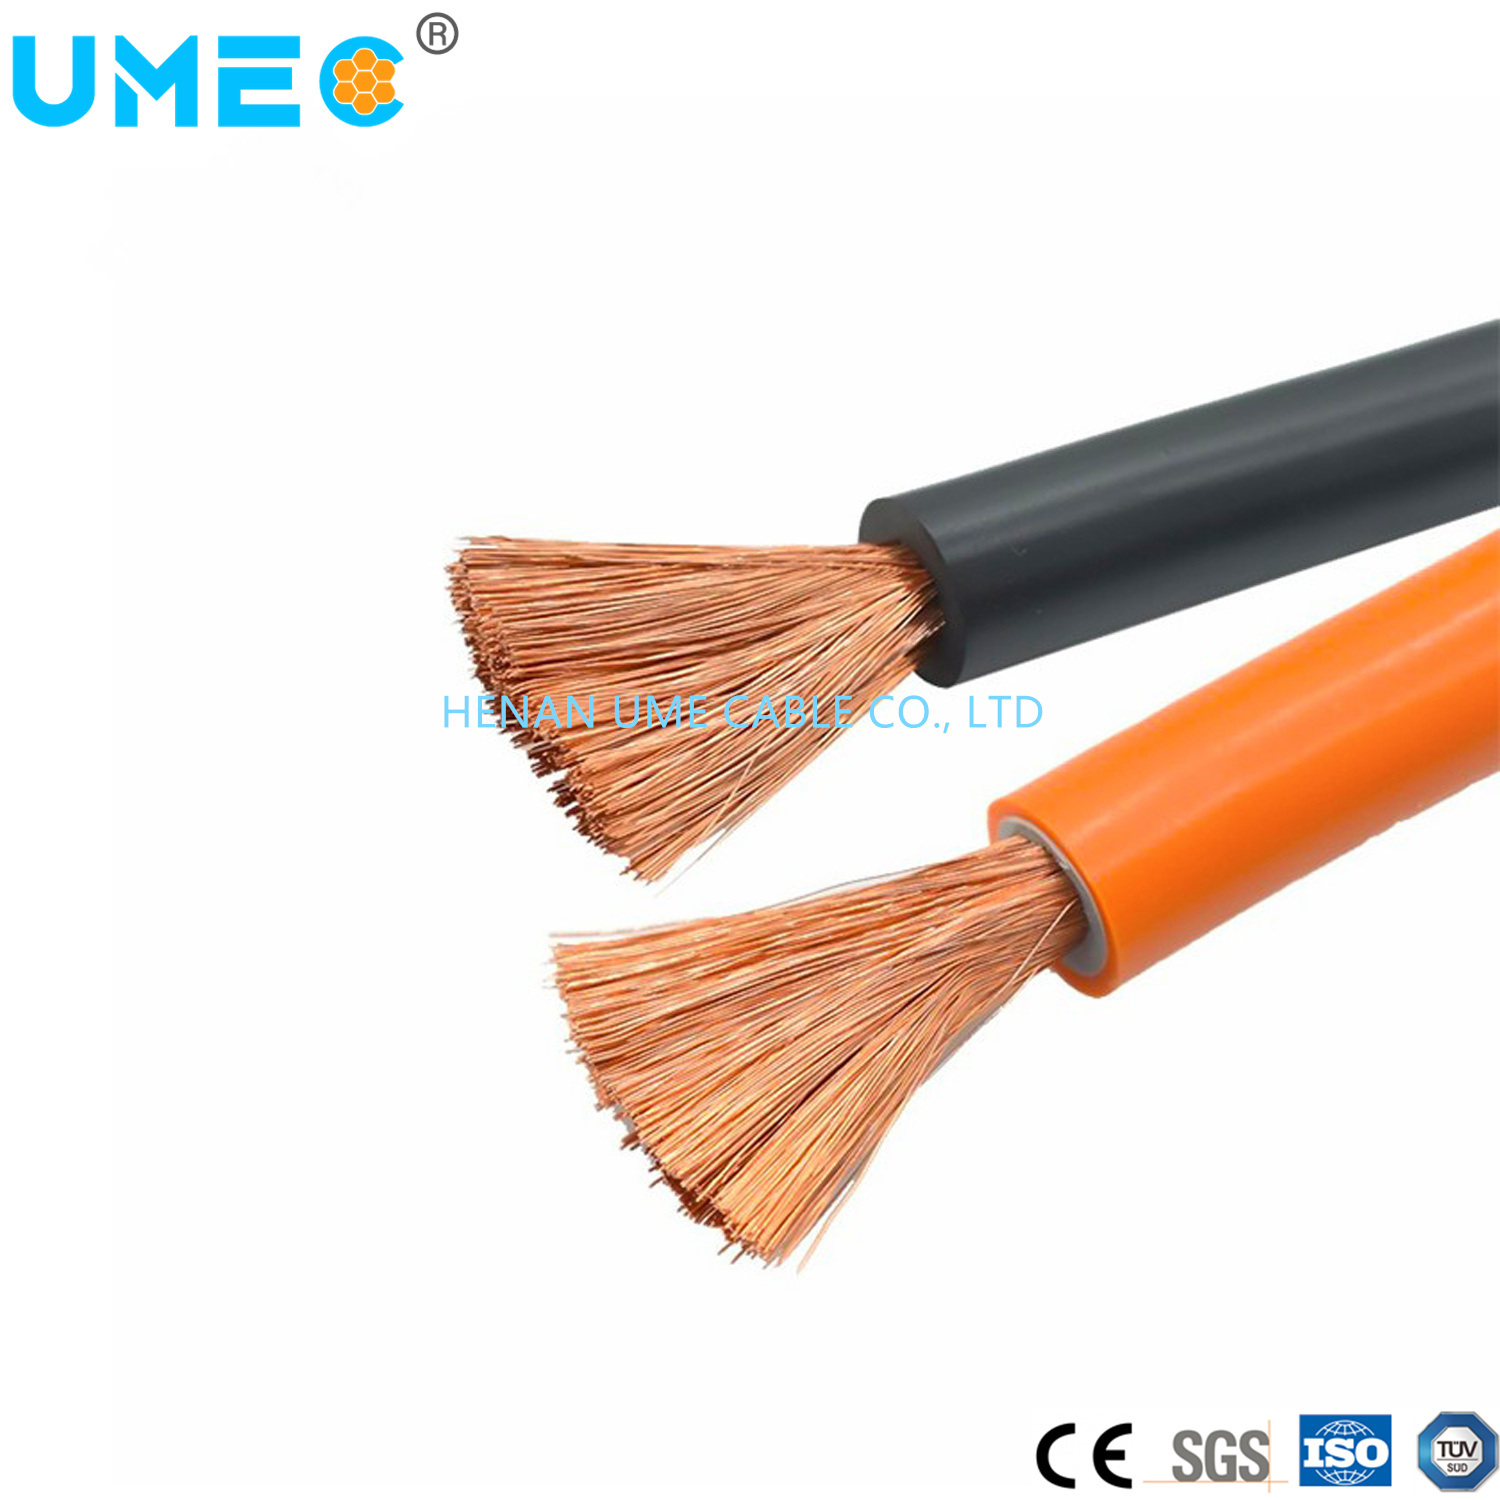 16mm2 35mm2 Rubber Sheath Welding Cable Yh Yhf